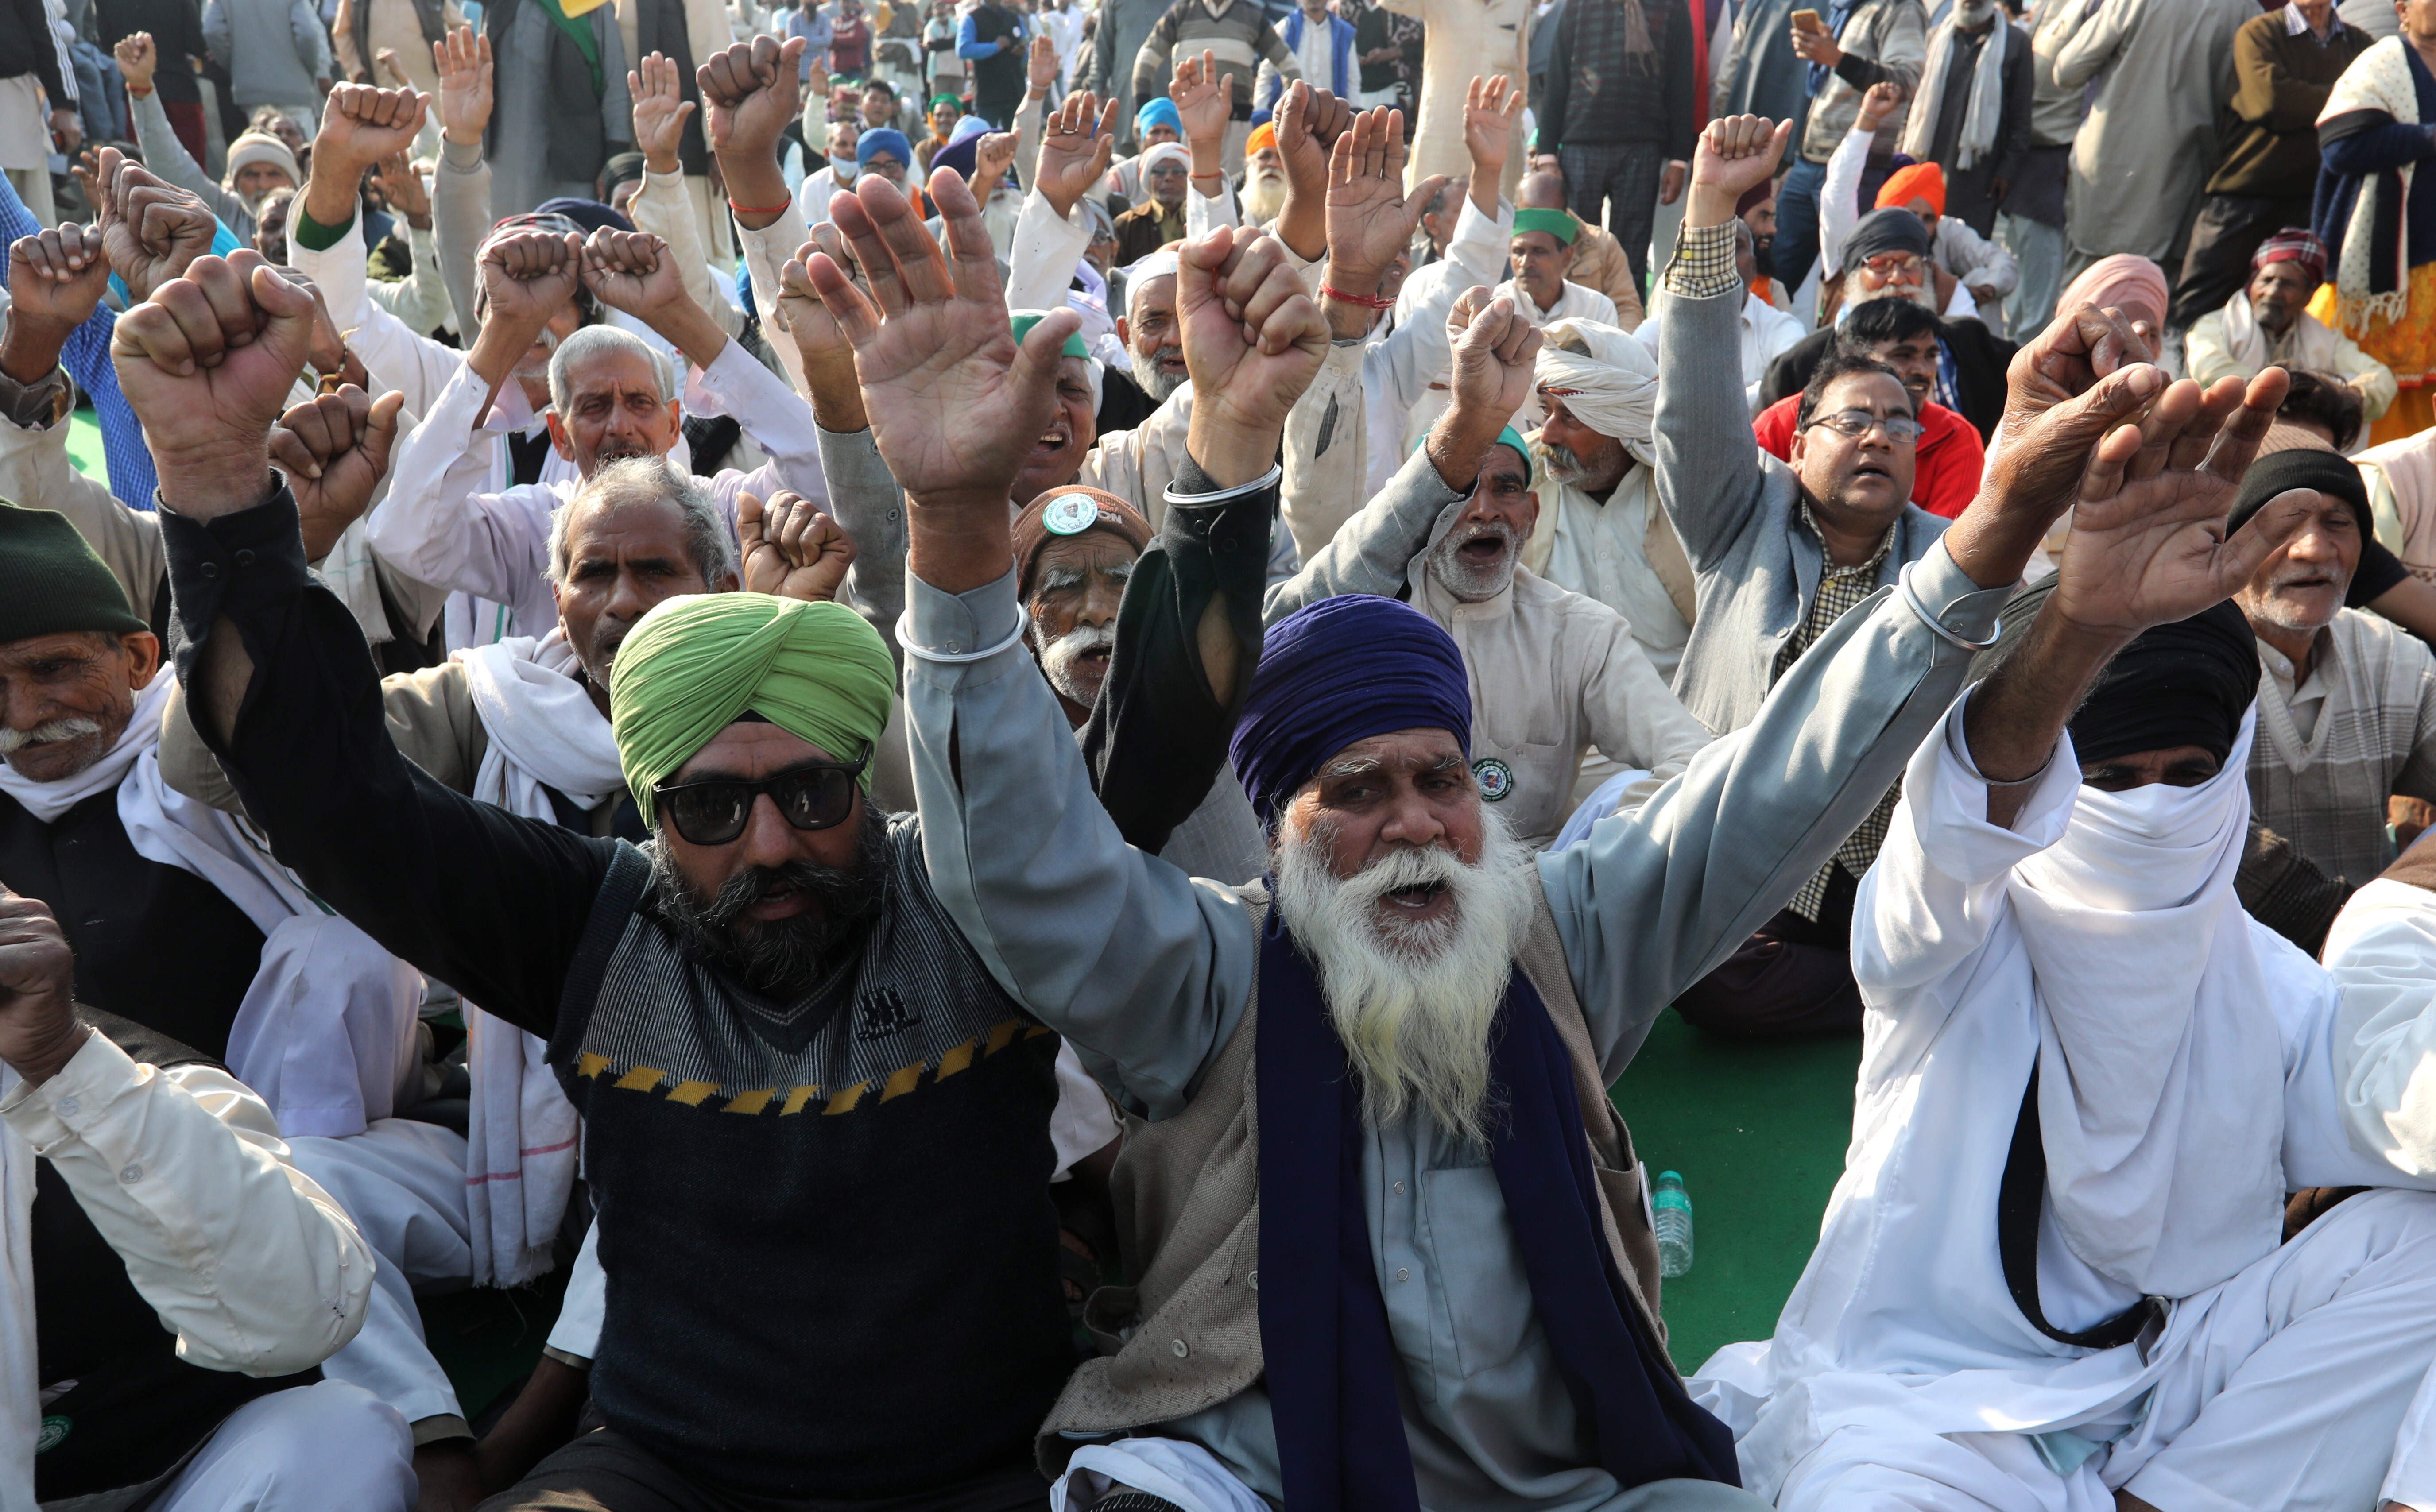 Indian farmers protesting at the Delhi Ghazipur Border near New Delhi. The US government’s criticism of India’s suspension of the internet during protests has stoked tensions between the two countries. Photo: EPA/EFE